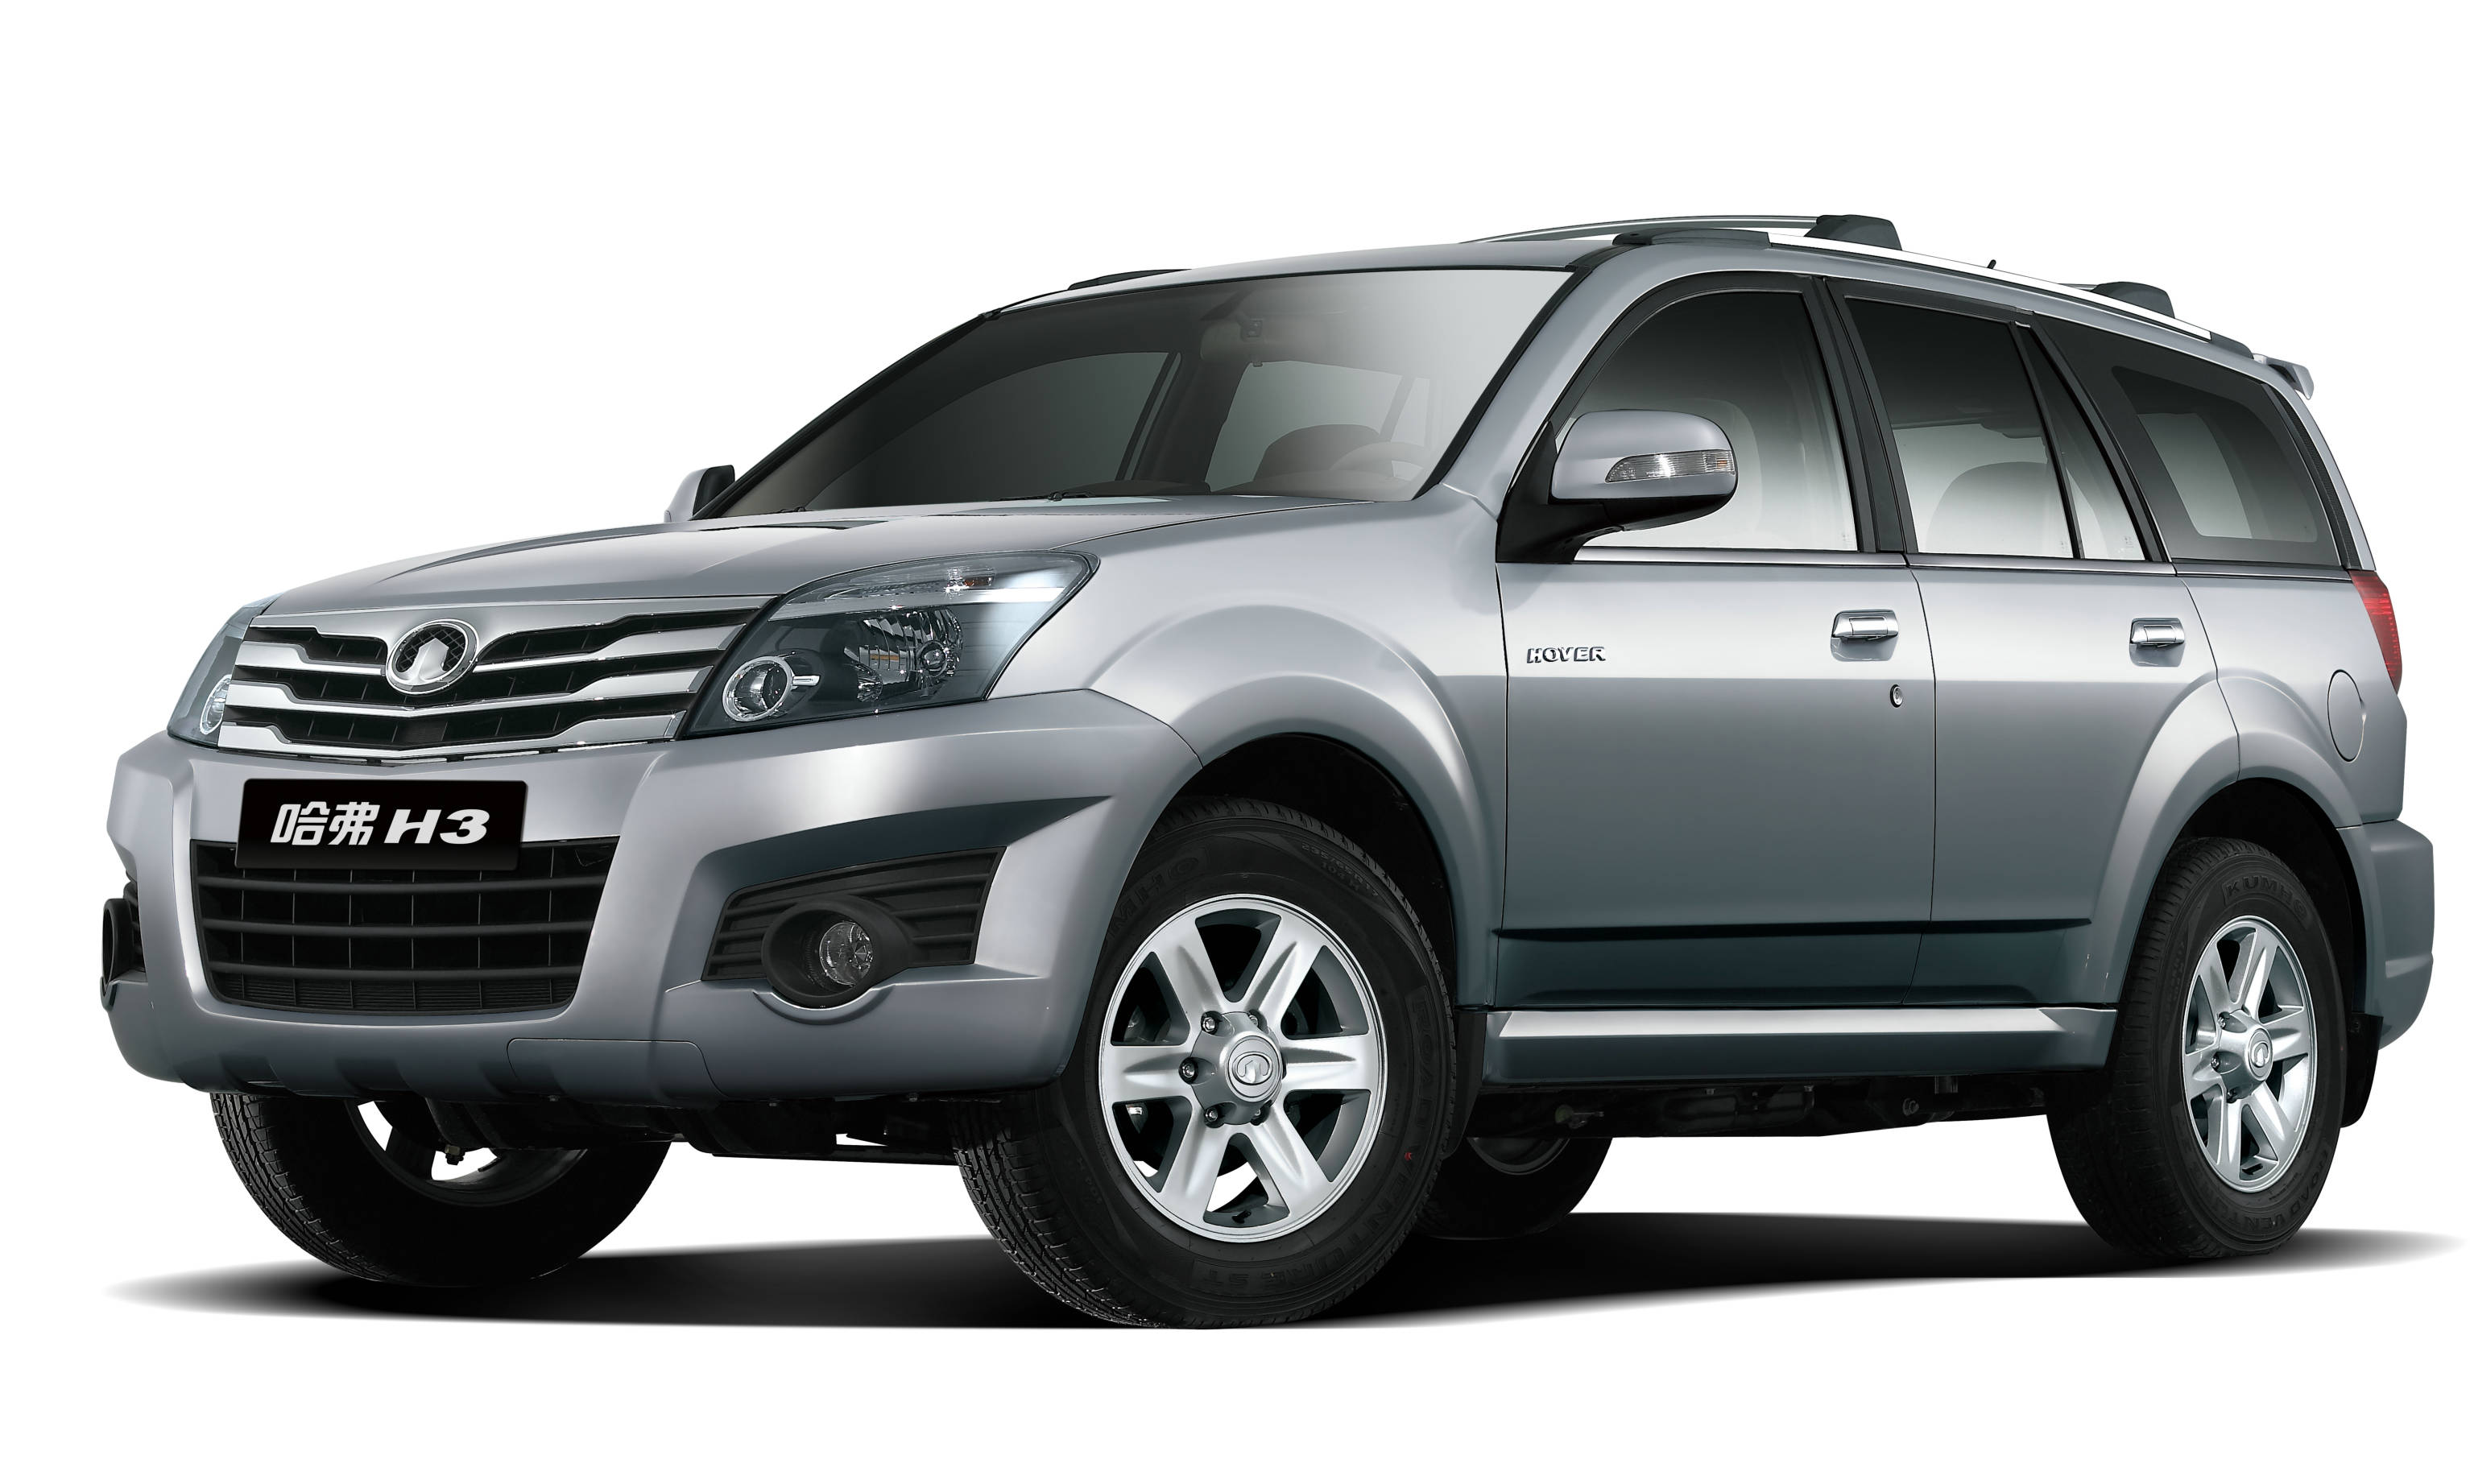 Ховер h3 2.0. Great Wall Hover h3. Great Wall Haval h3. Great Wall Hover h3 2005. Грейт вол Ховер н3.